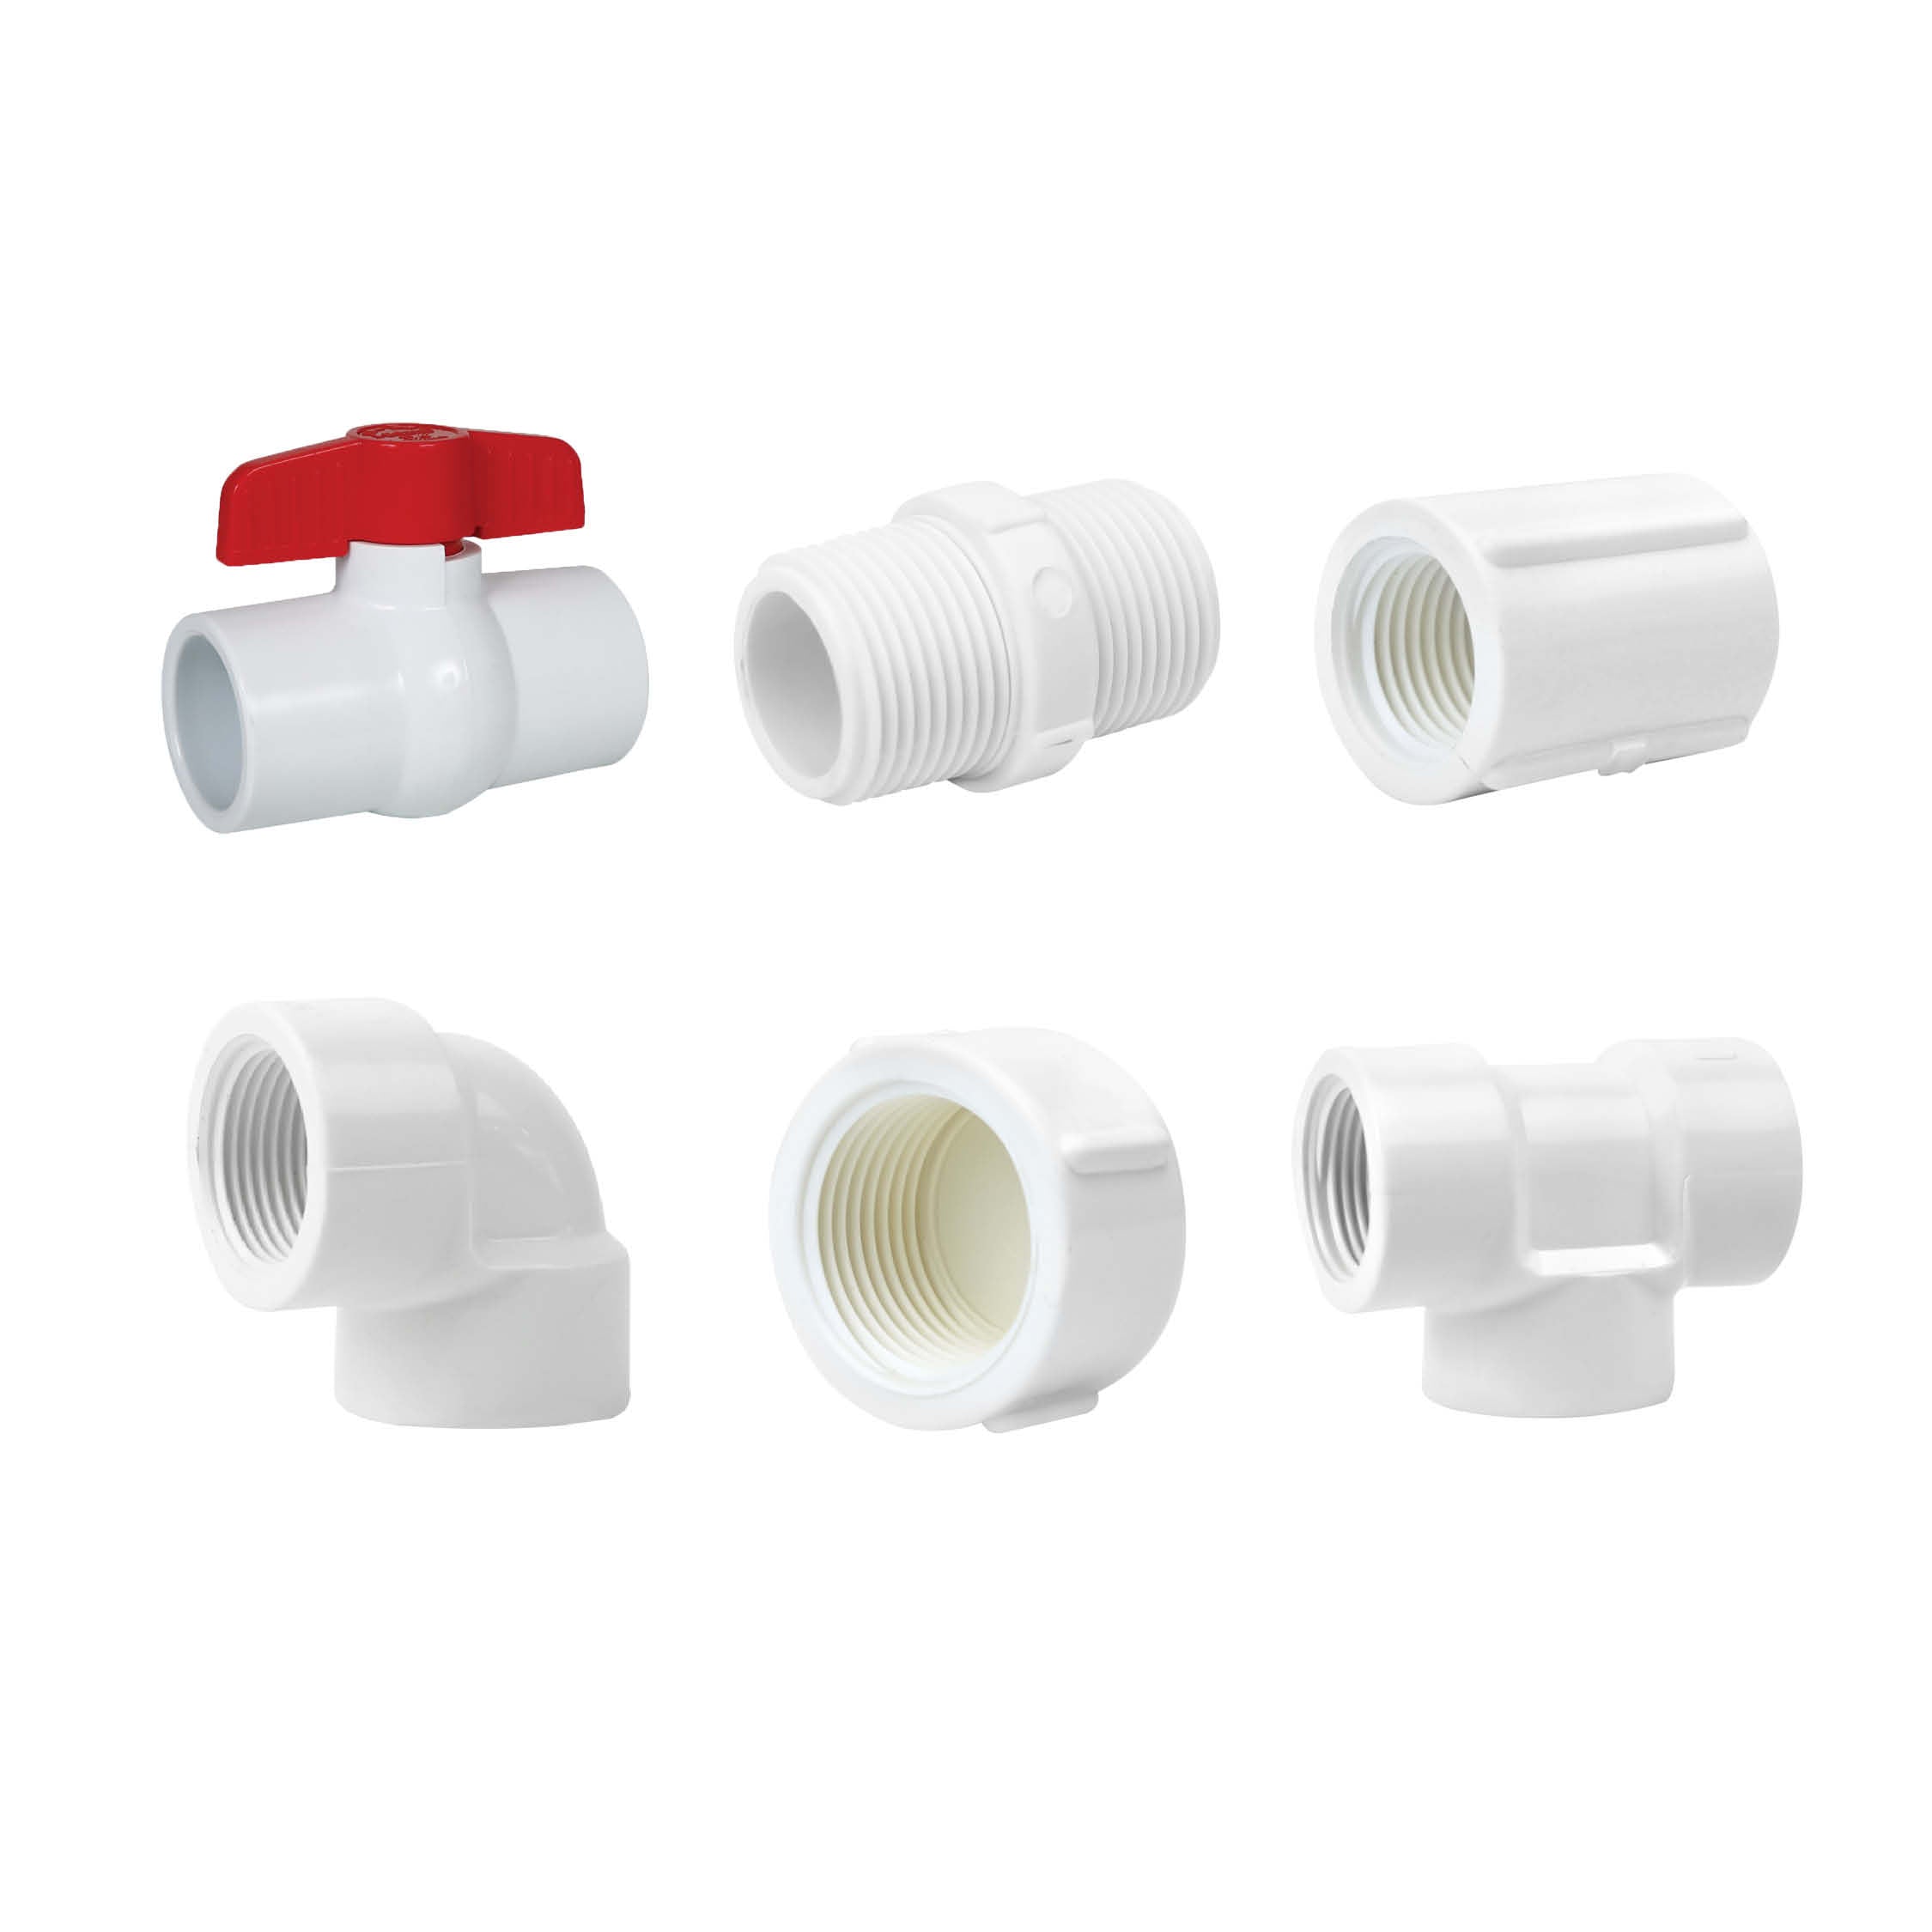 PVC Fittings and Irrigation Supplies - Shasta Forest Products, Inc